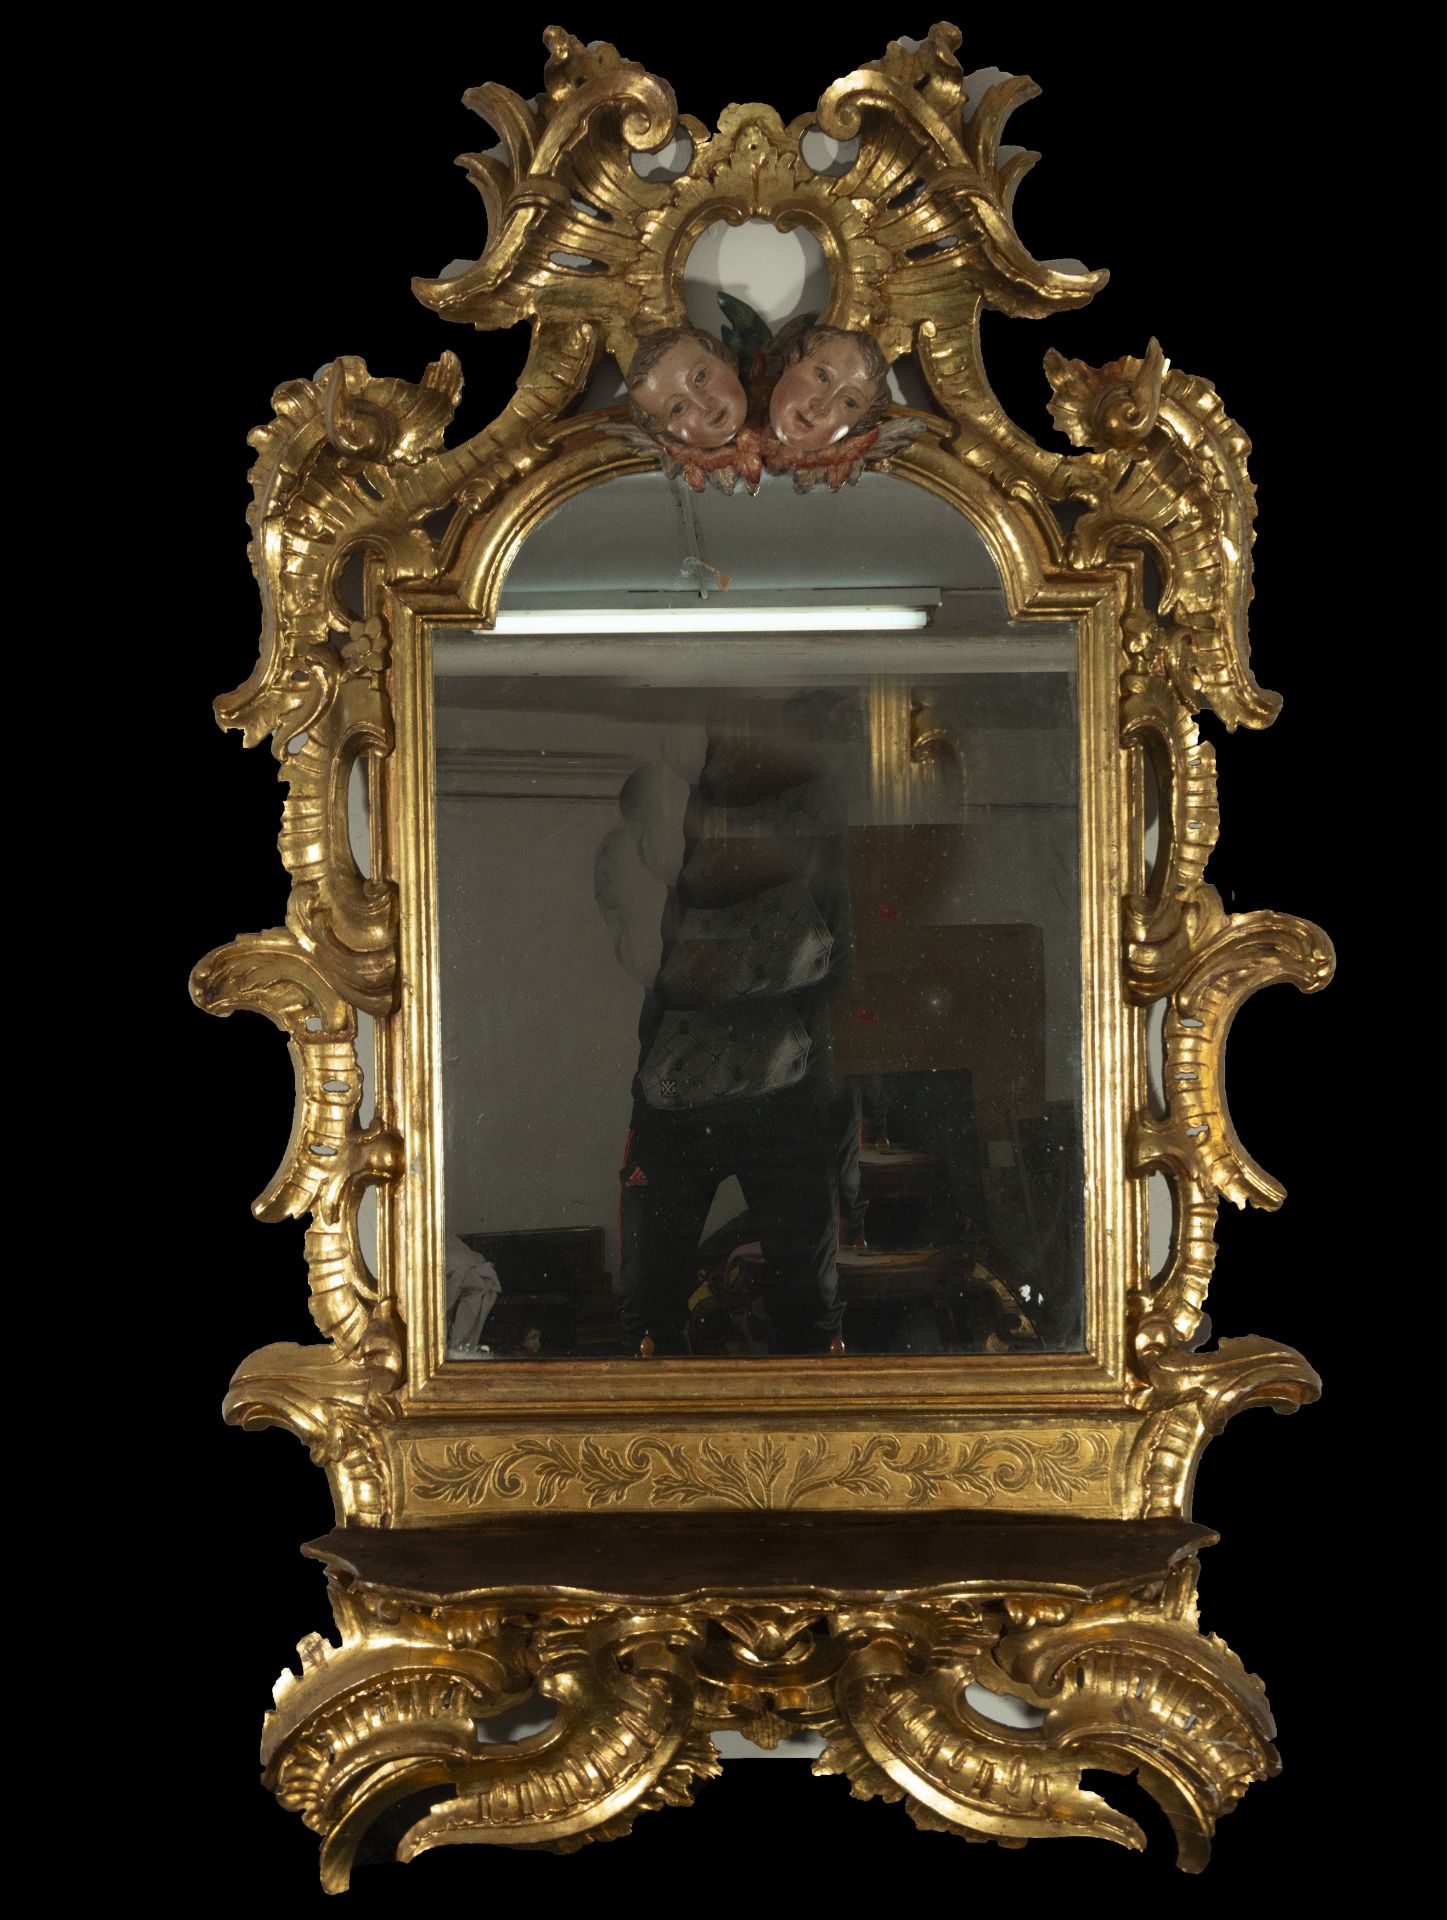 Antique Spanish frame from the 17th century transformed into a carved wood mirror